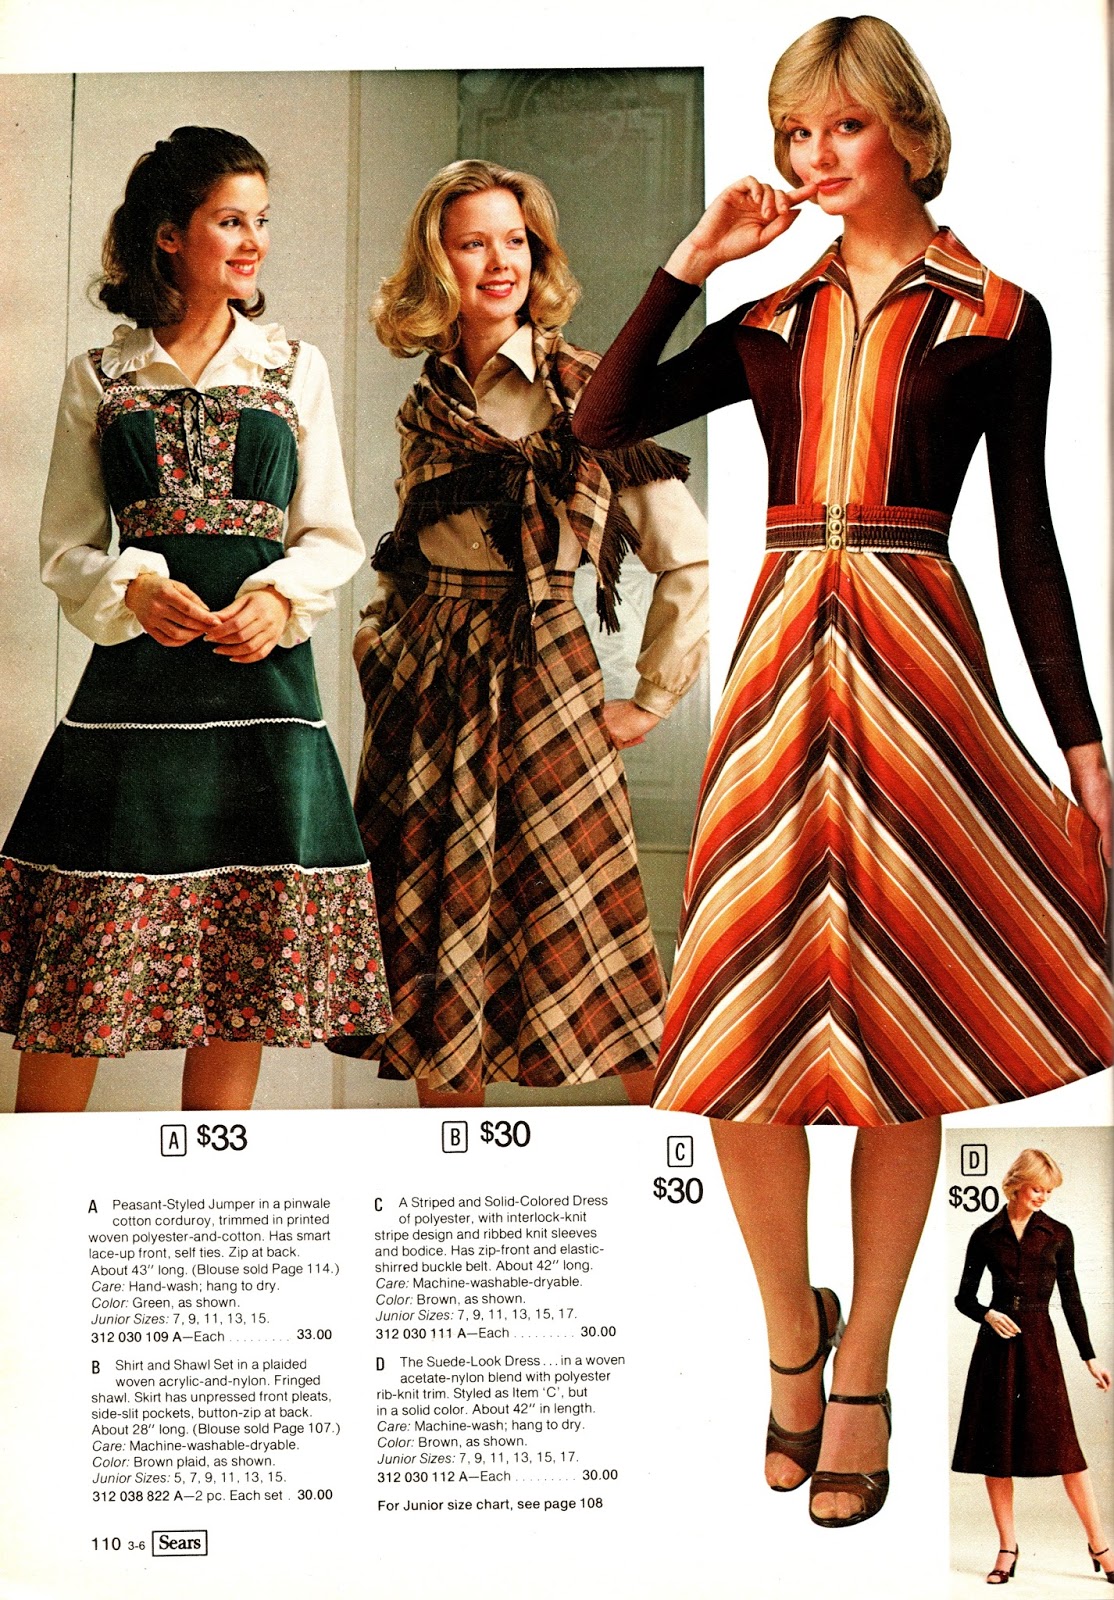 Kathy Loghry Blogspot That's So 70s Fall into Fall Fashions!!